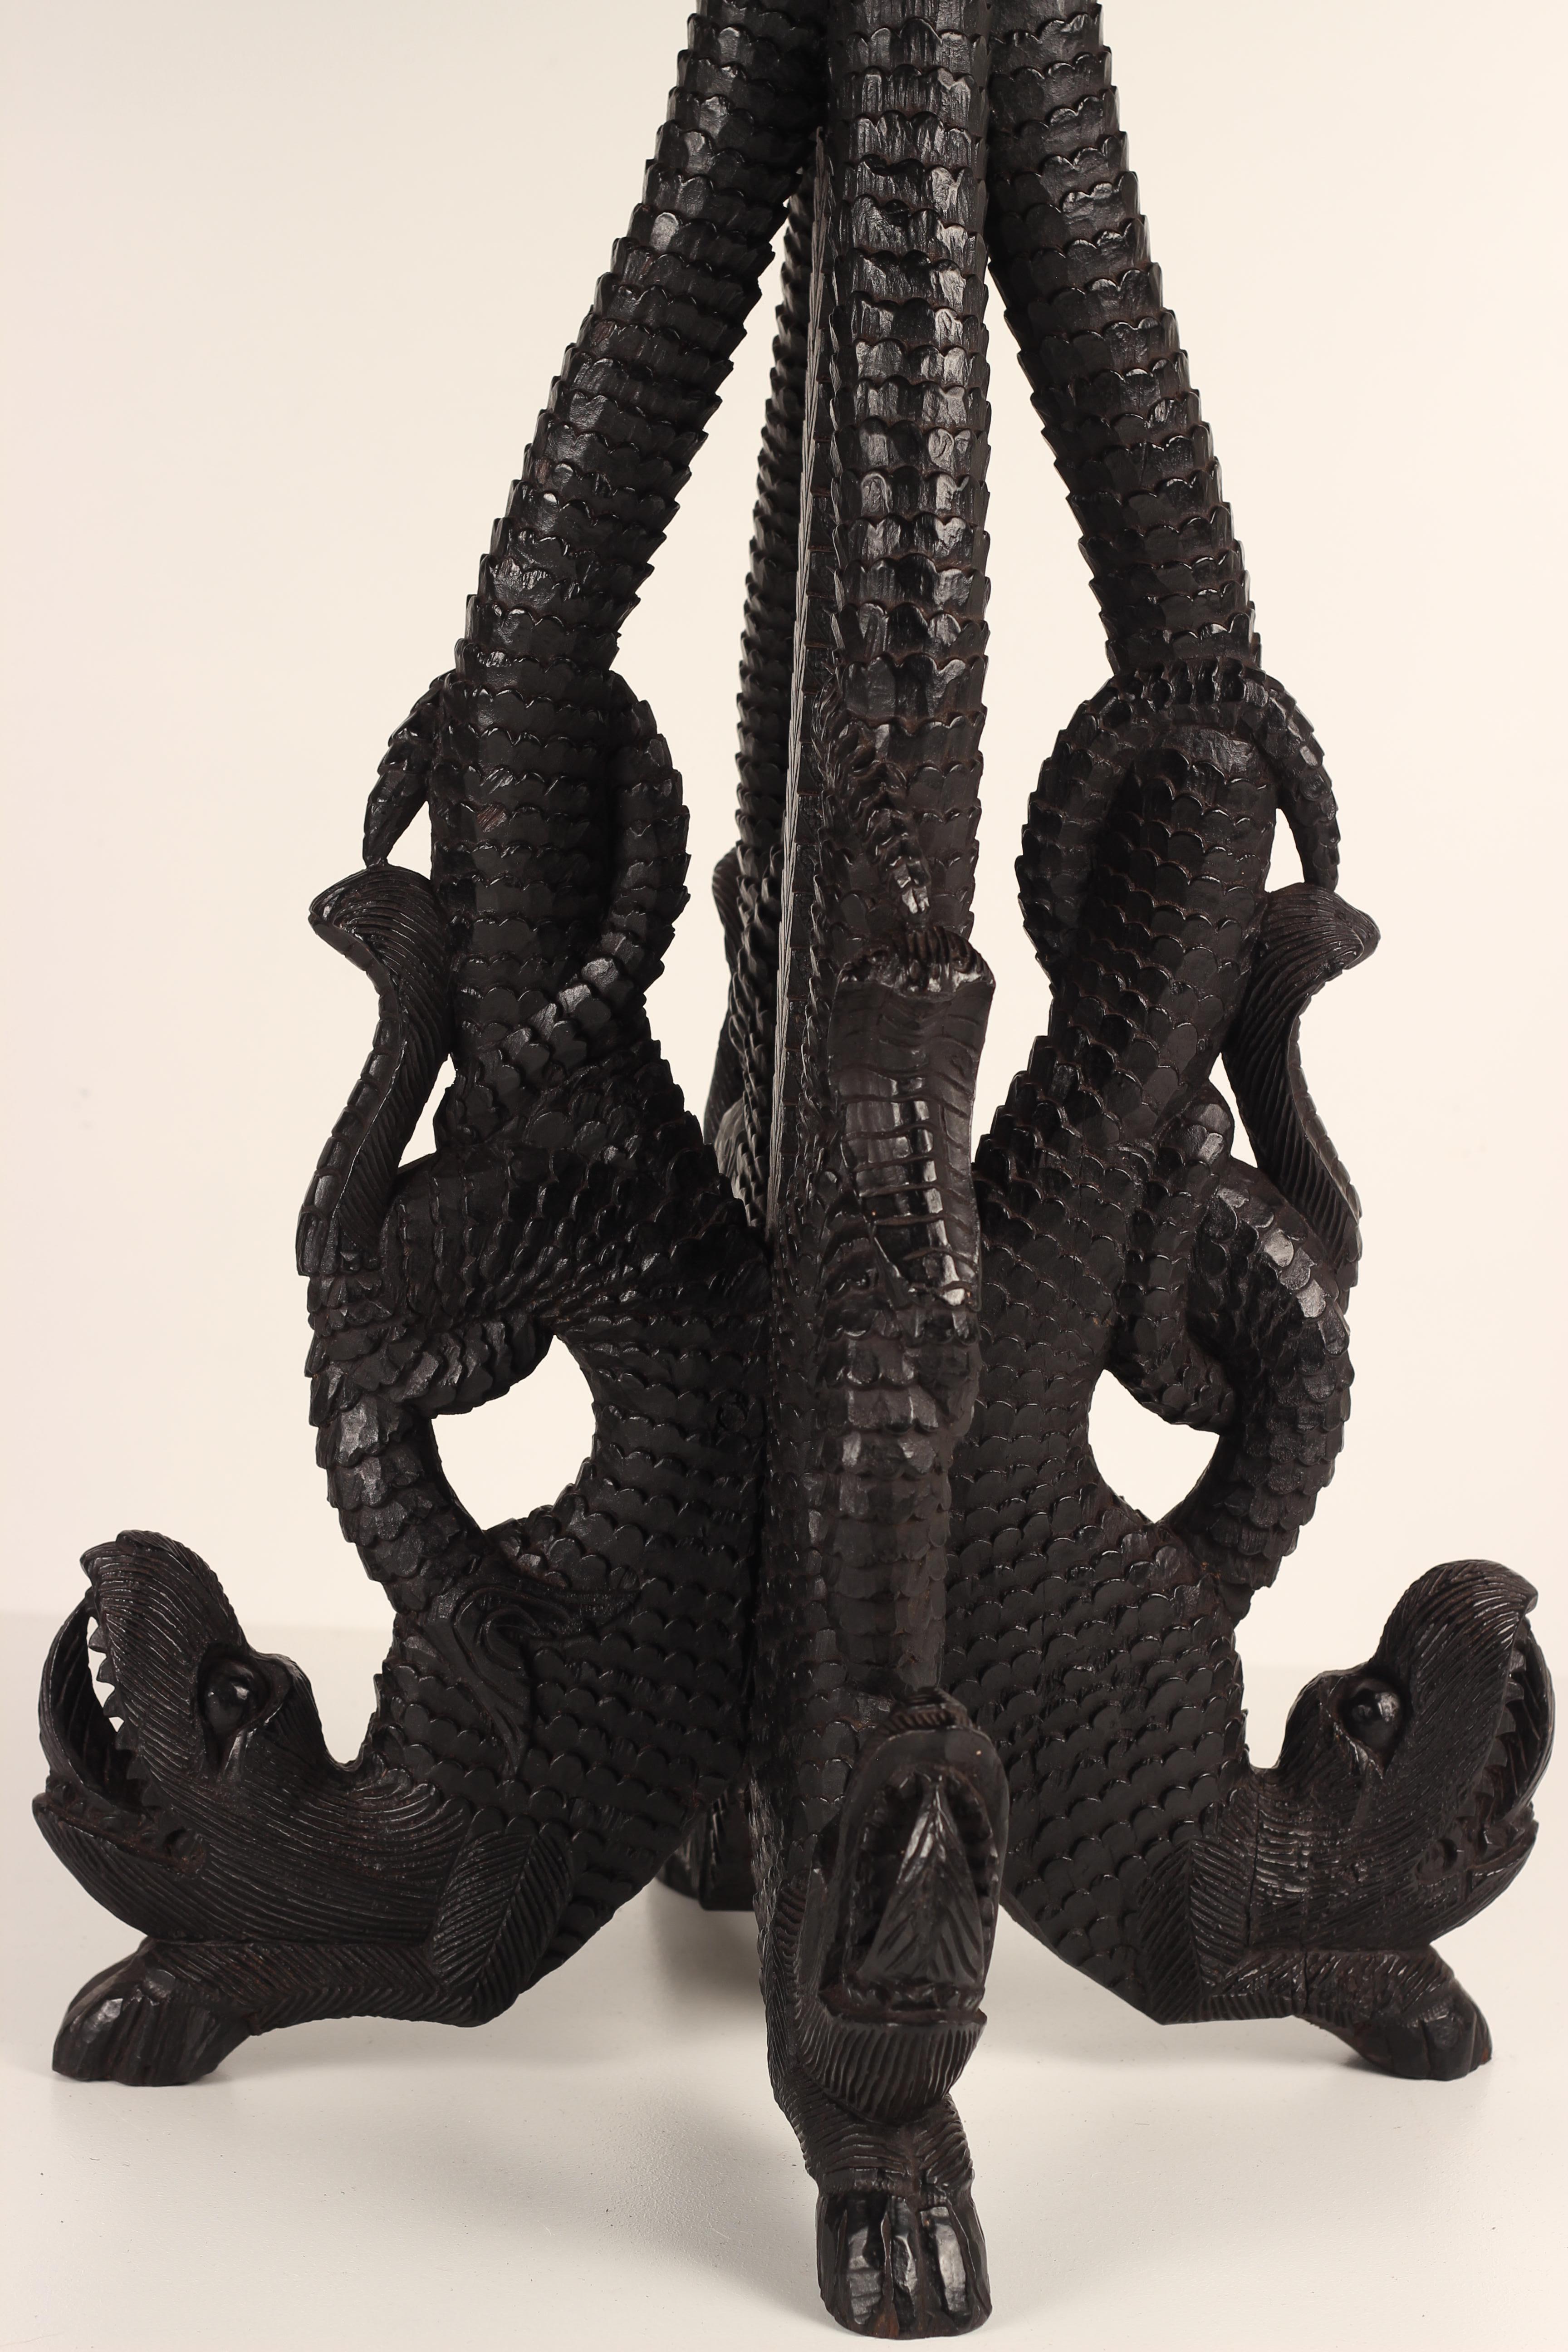 British Indian Ocean Territory Boho Chic Style Anglo-Indian Carved Dragons Rosewood Centre Table, 19th Century For Sale